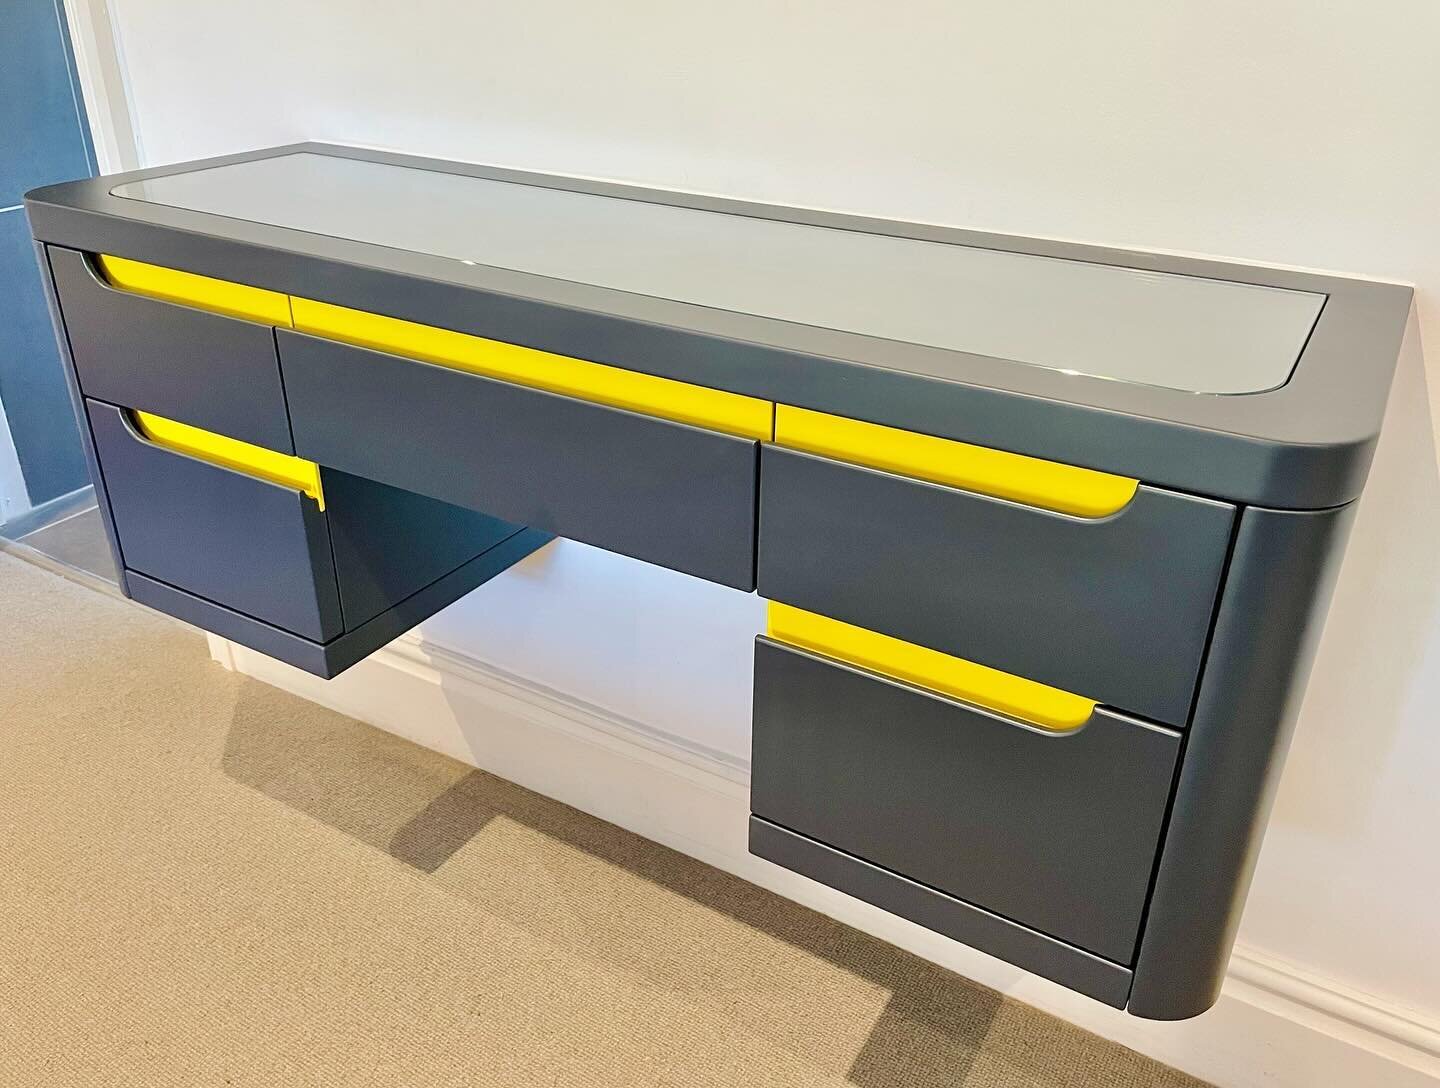 - Floating Vanity Unit -
This had some nice little details to it, including curved end panels, two-tone finger pull handles and a sunken glass top to prevent the clients&rsquo; young children from getting hold of it. 

Coming up next on this project 